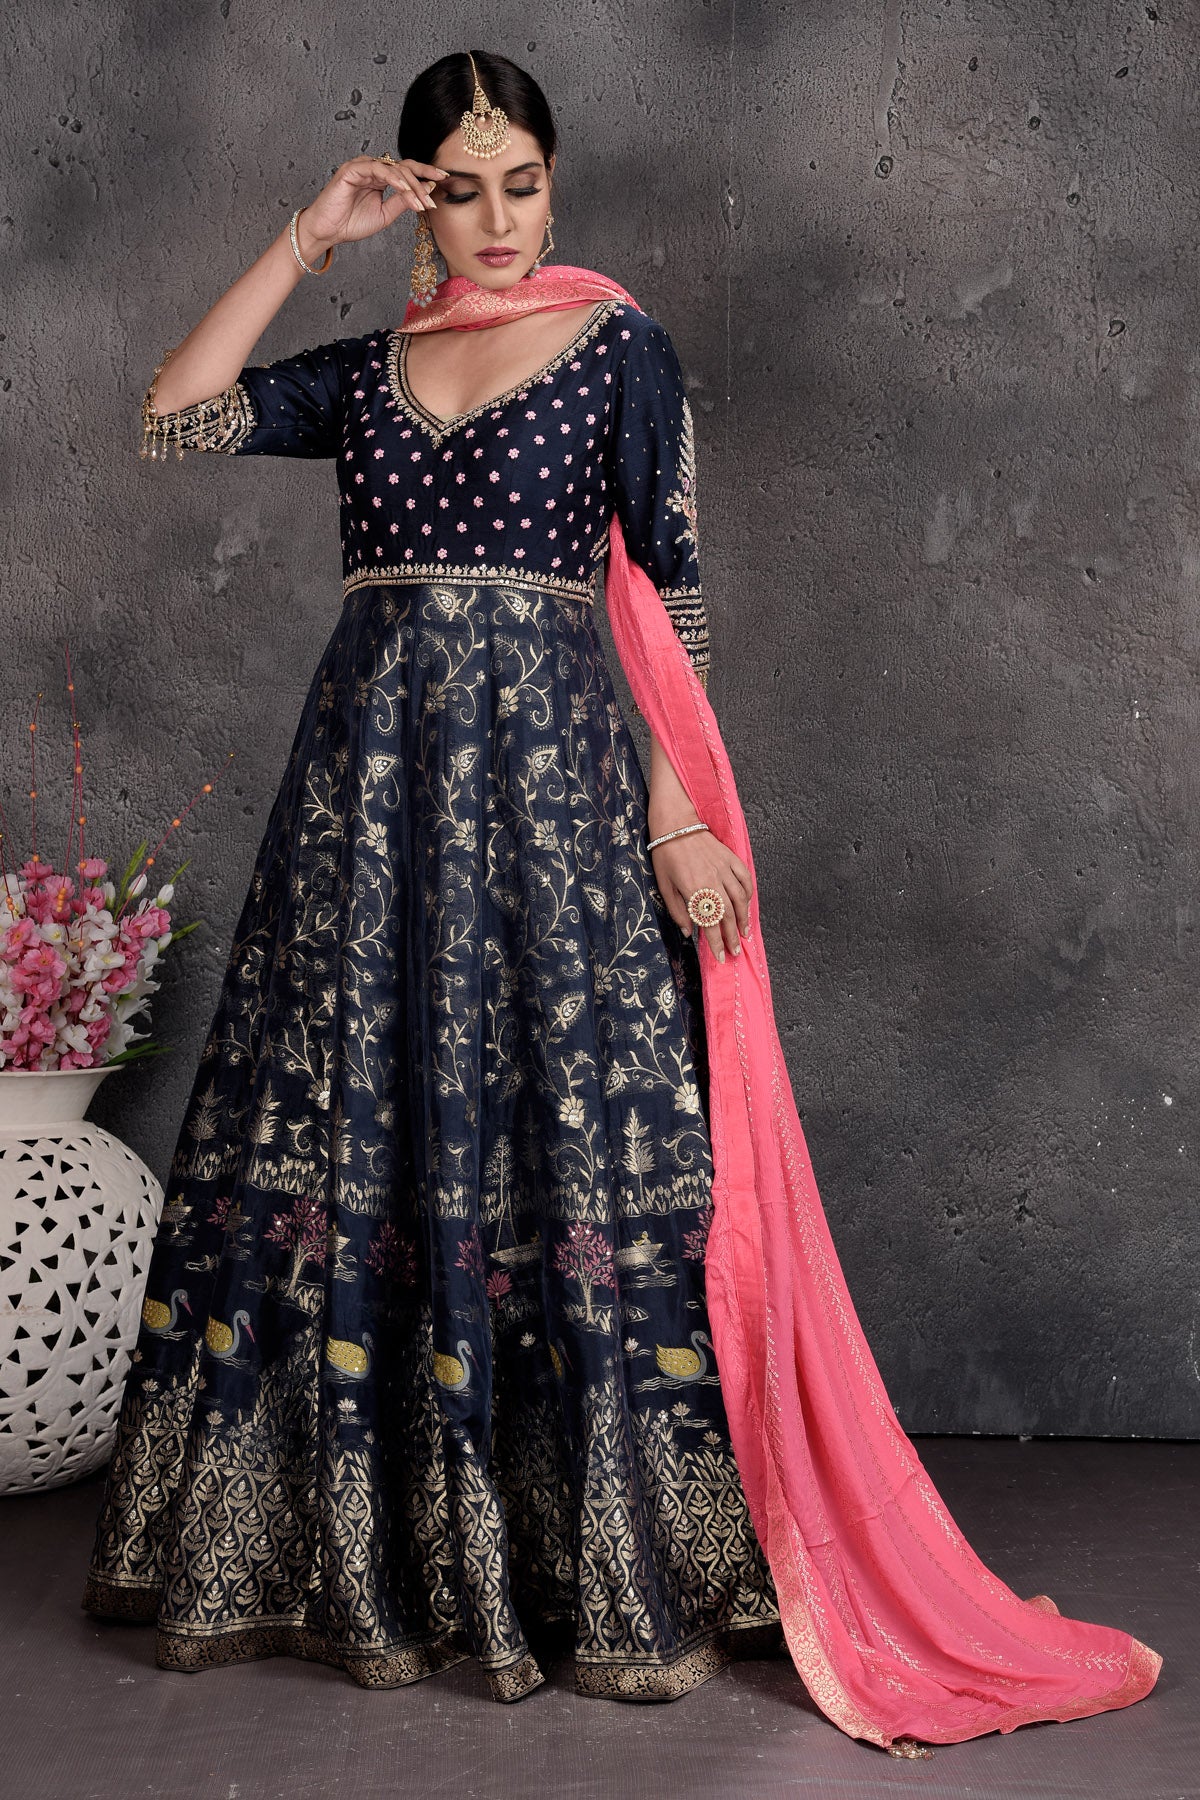 Buy stunning dark blue embroidered Anarkali suit online in USA with pink dupatta. Set a fashion statement at parties in designer Indian suits, Anarkali suits, designer lehengas, gowns, Indowestern dresses from Pure Elegance Indian fashion store in USA.-dupatta